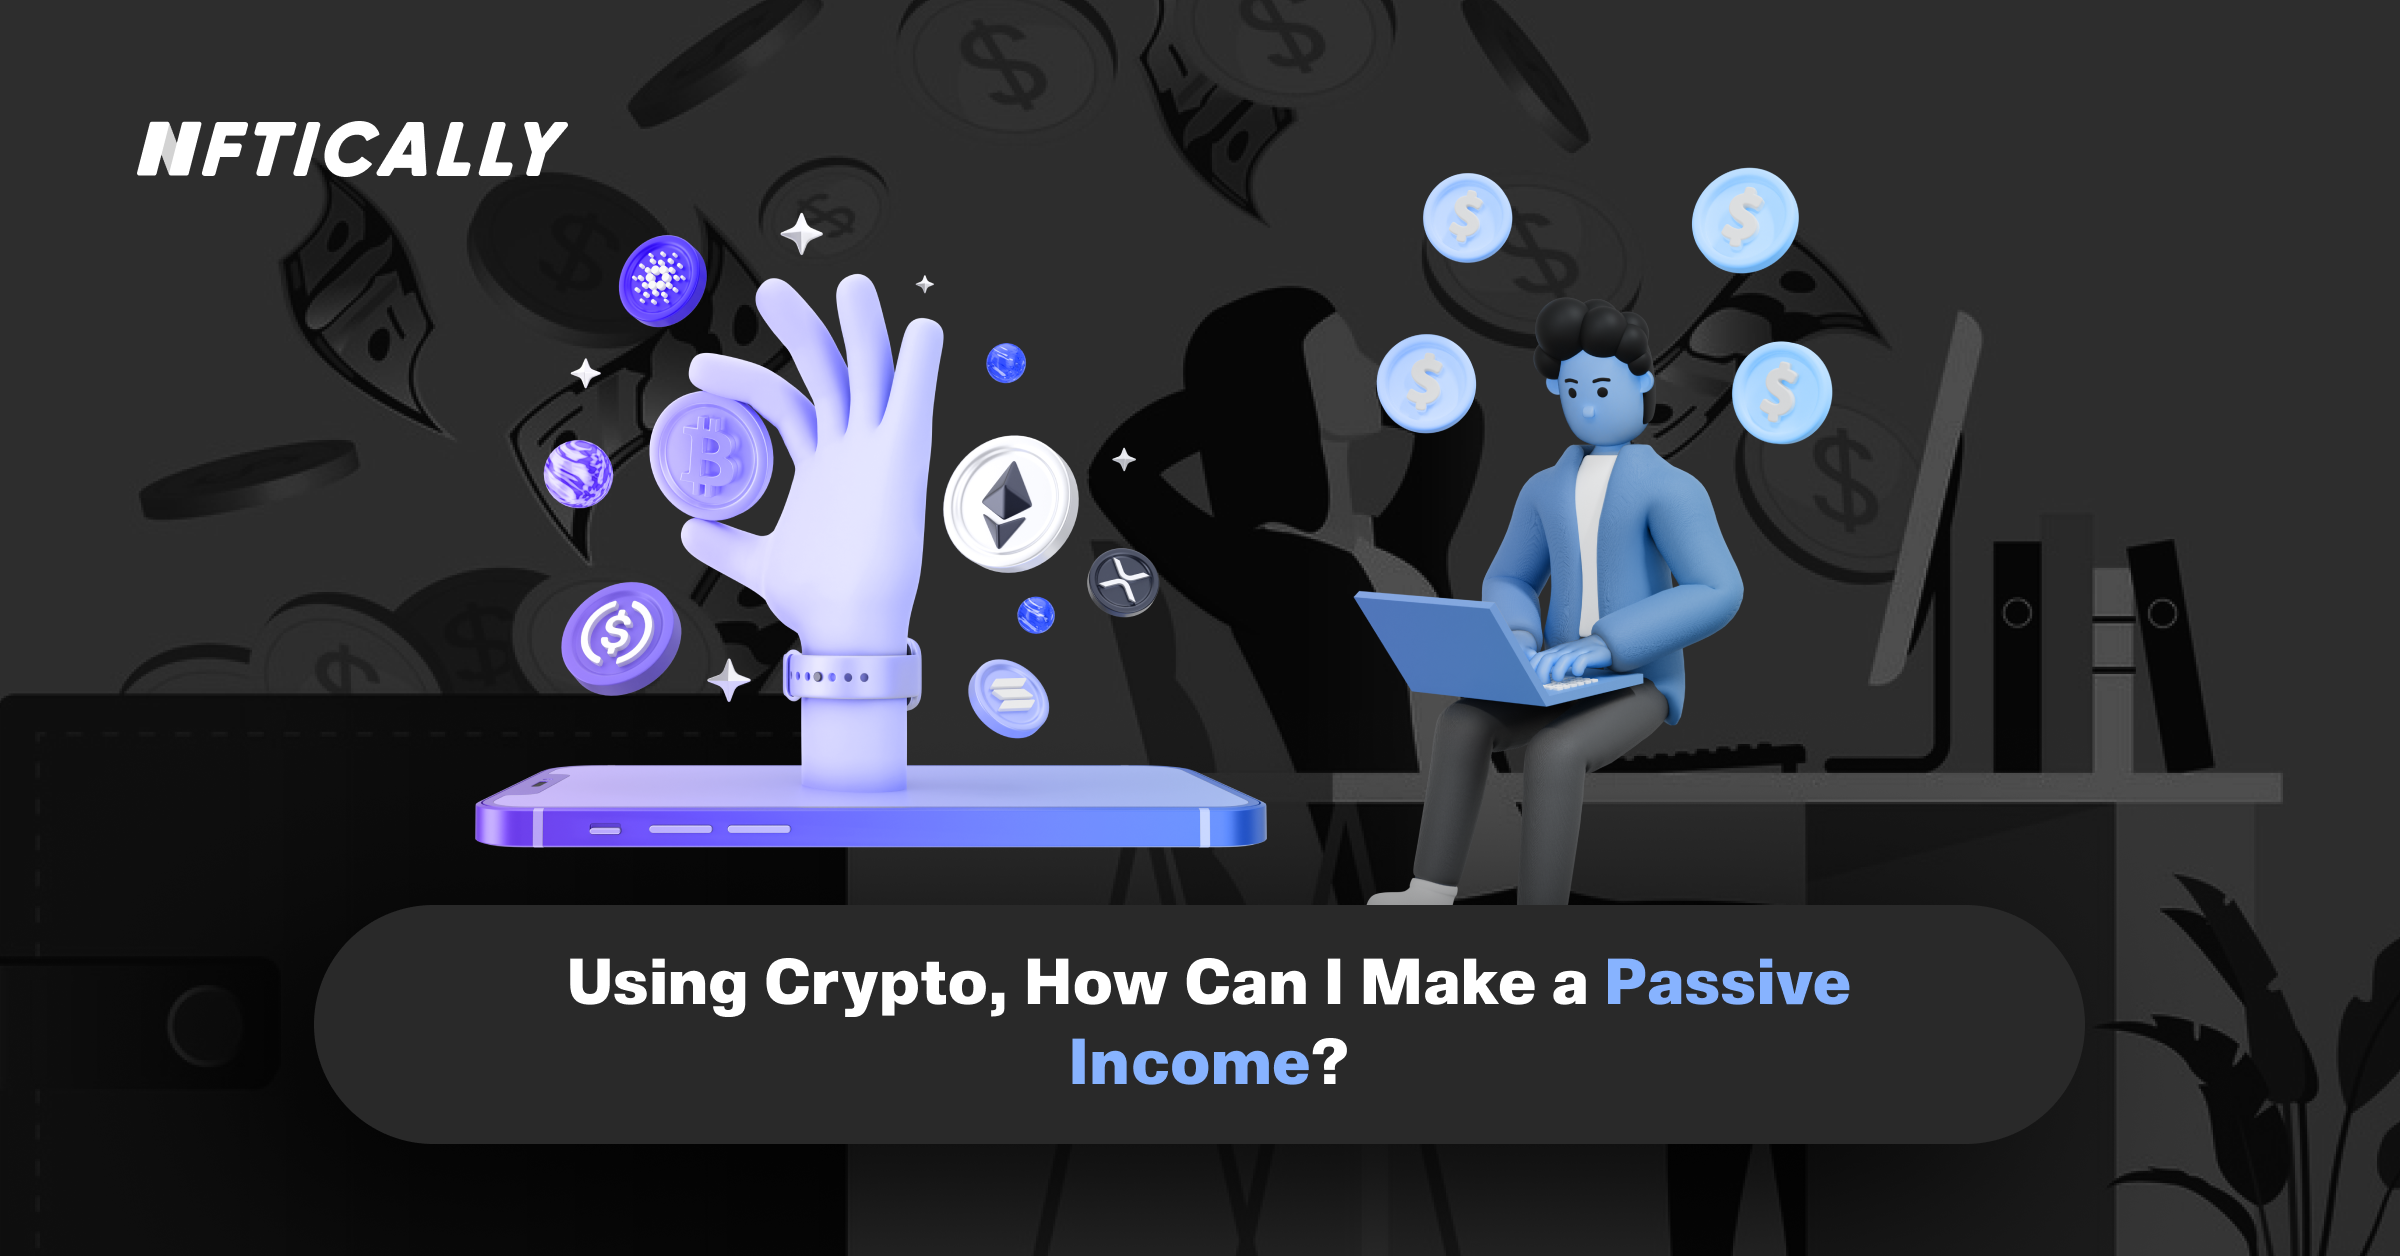 Using Crypto, How Can I Make a Passive Income?